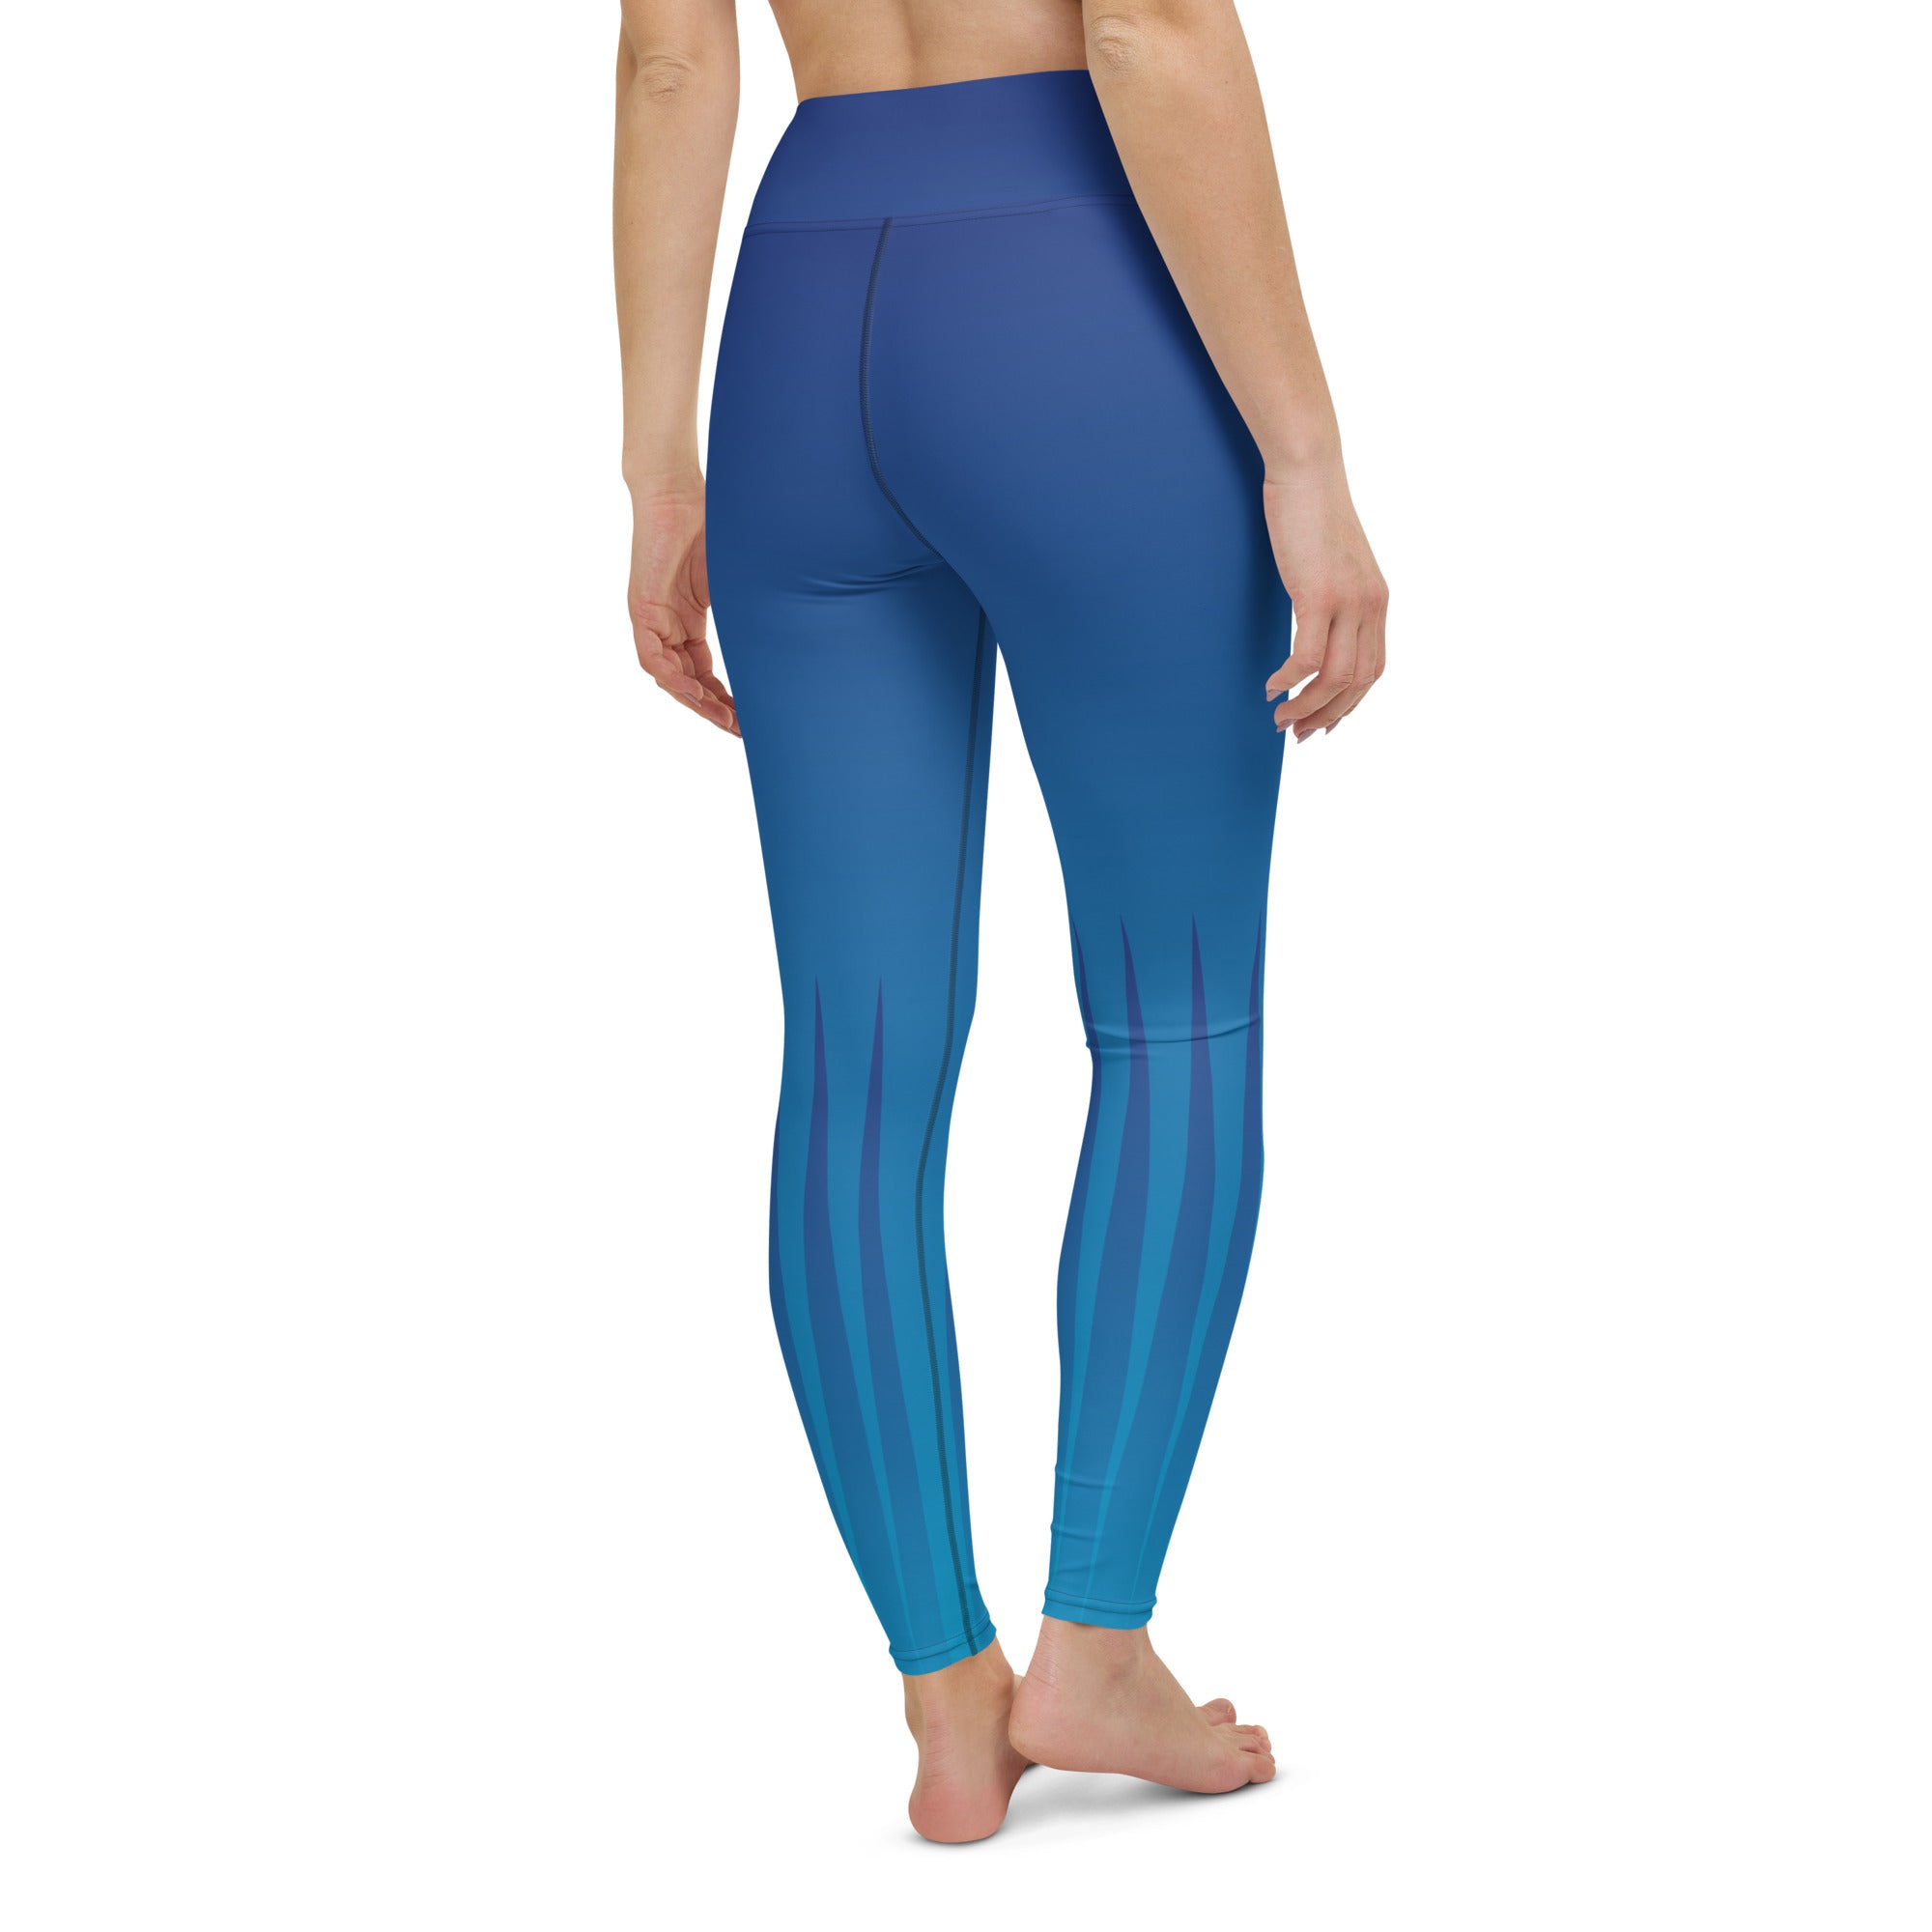 Illuminate your yoga practice with the warm, radiant hues of Golden Hour Leggings.